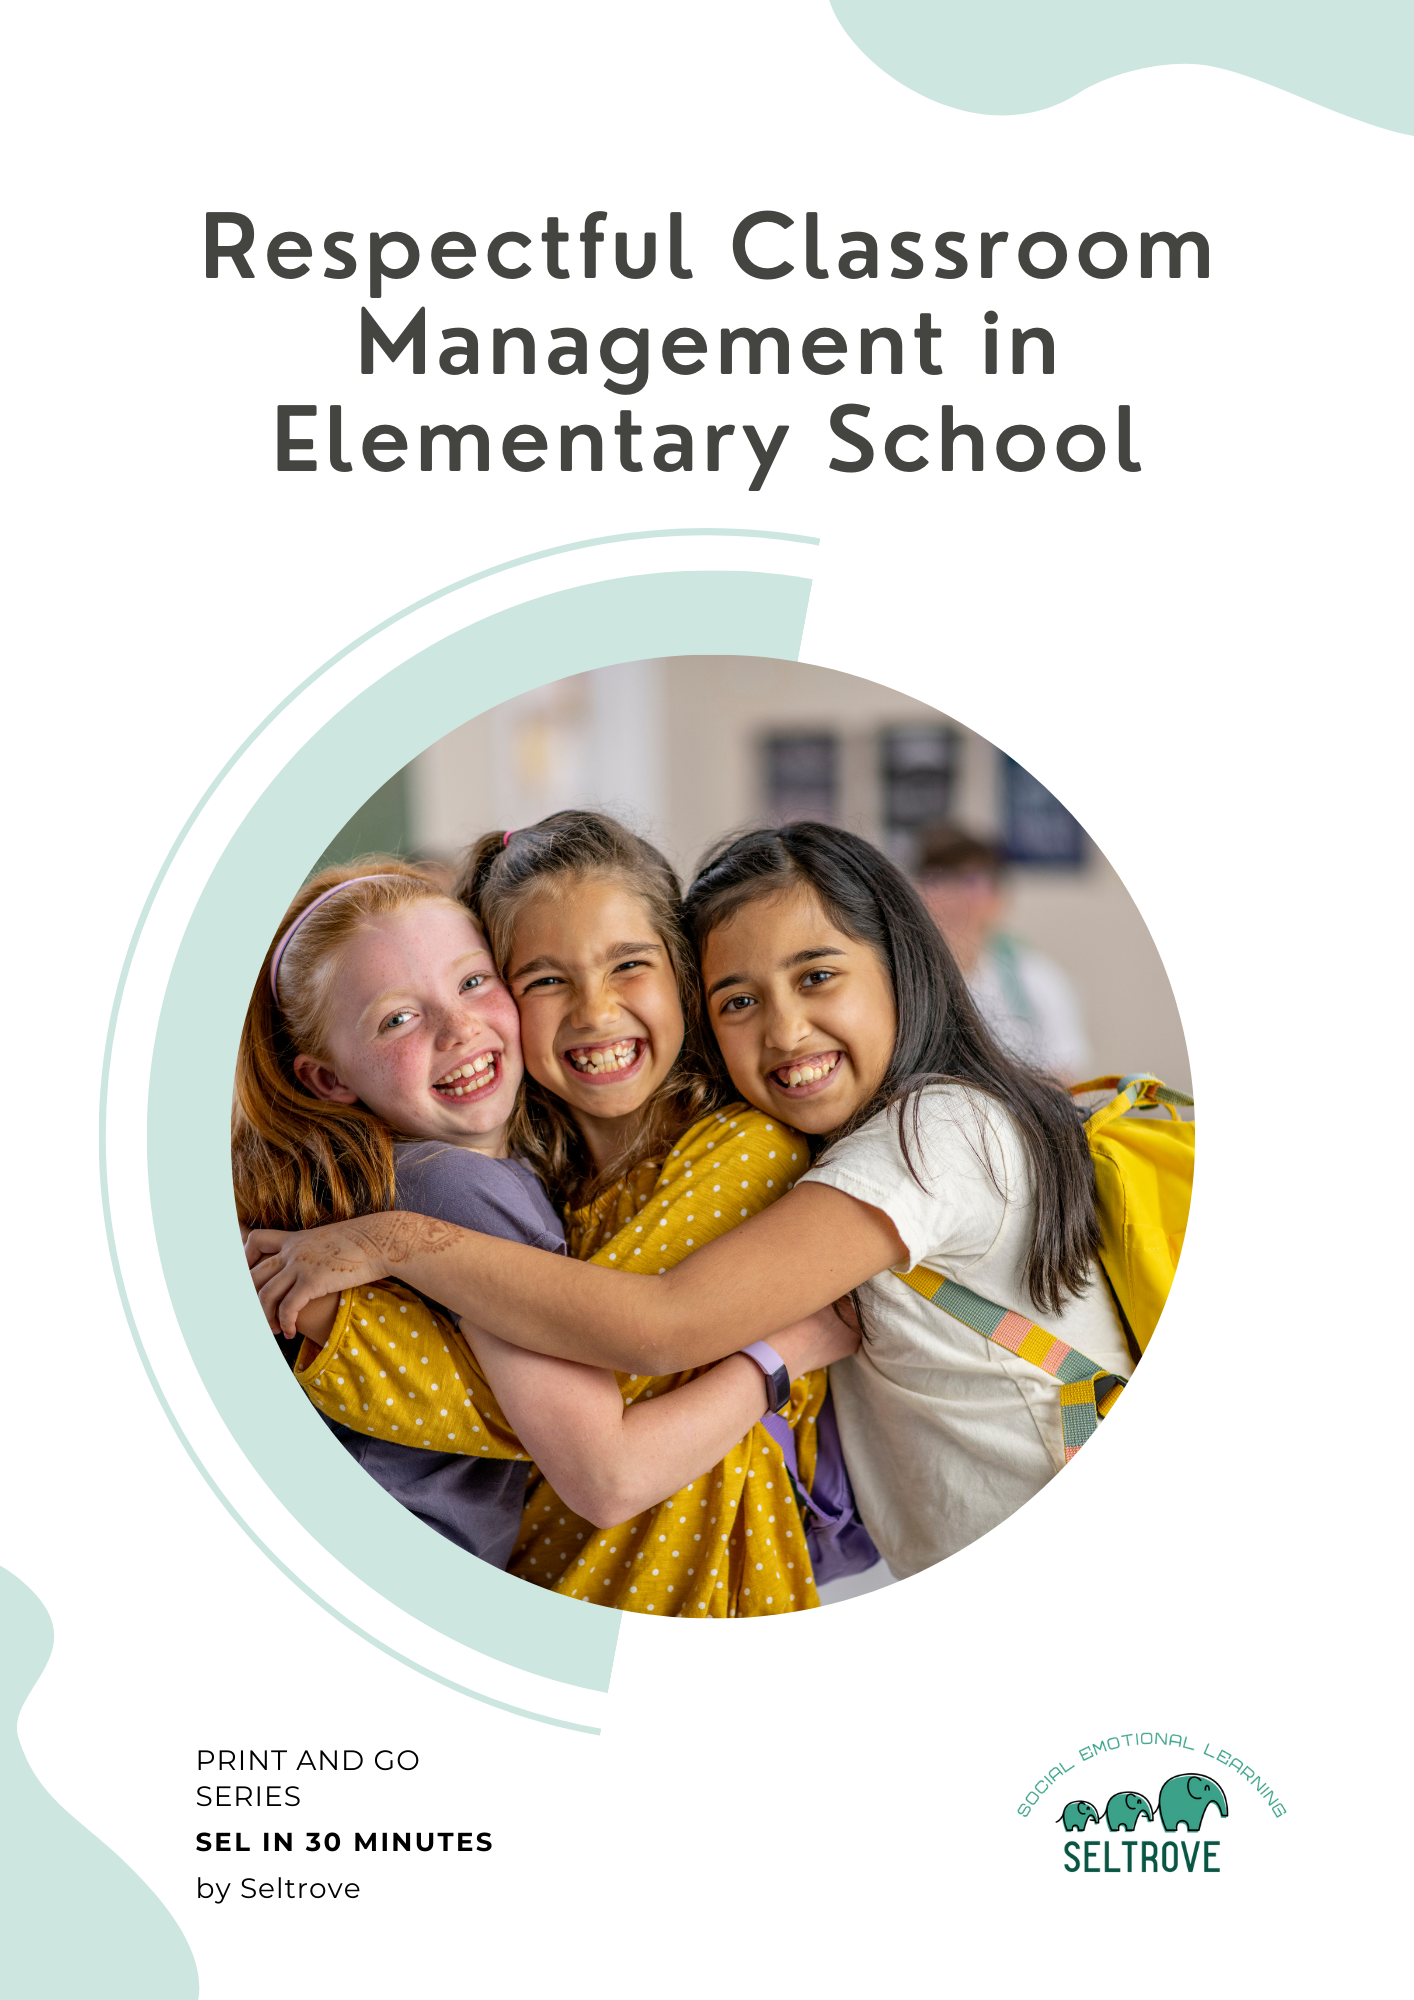 Respectful Classroom Management Tools in Elementary School (Print and Go Pack)